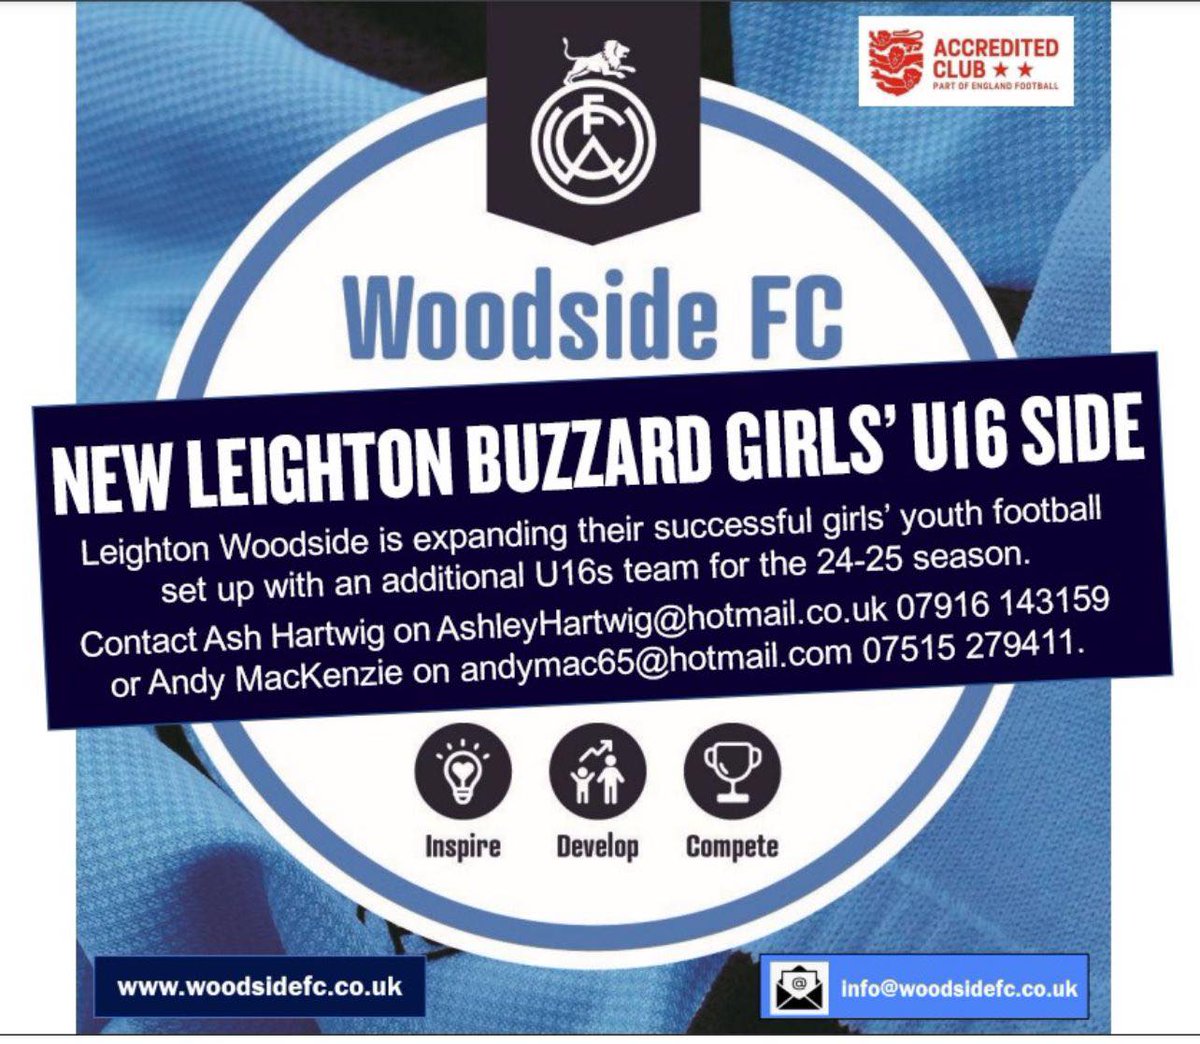 ⚽️ PLAYERS WANTED ⚽️ @Woodsidefc75 are looking for additional players to join a new U16's Girls team ahead of the 2024/25 season. For more information please contact 👇 AshleyHartwig@hotmail.co.uk / andymac65@hotmail.com